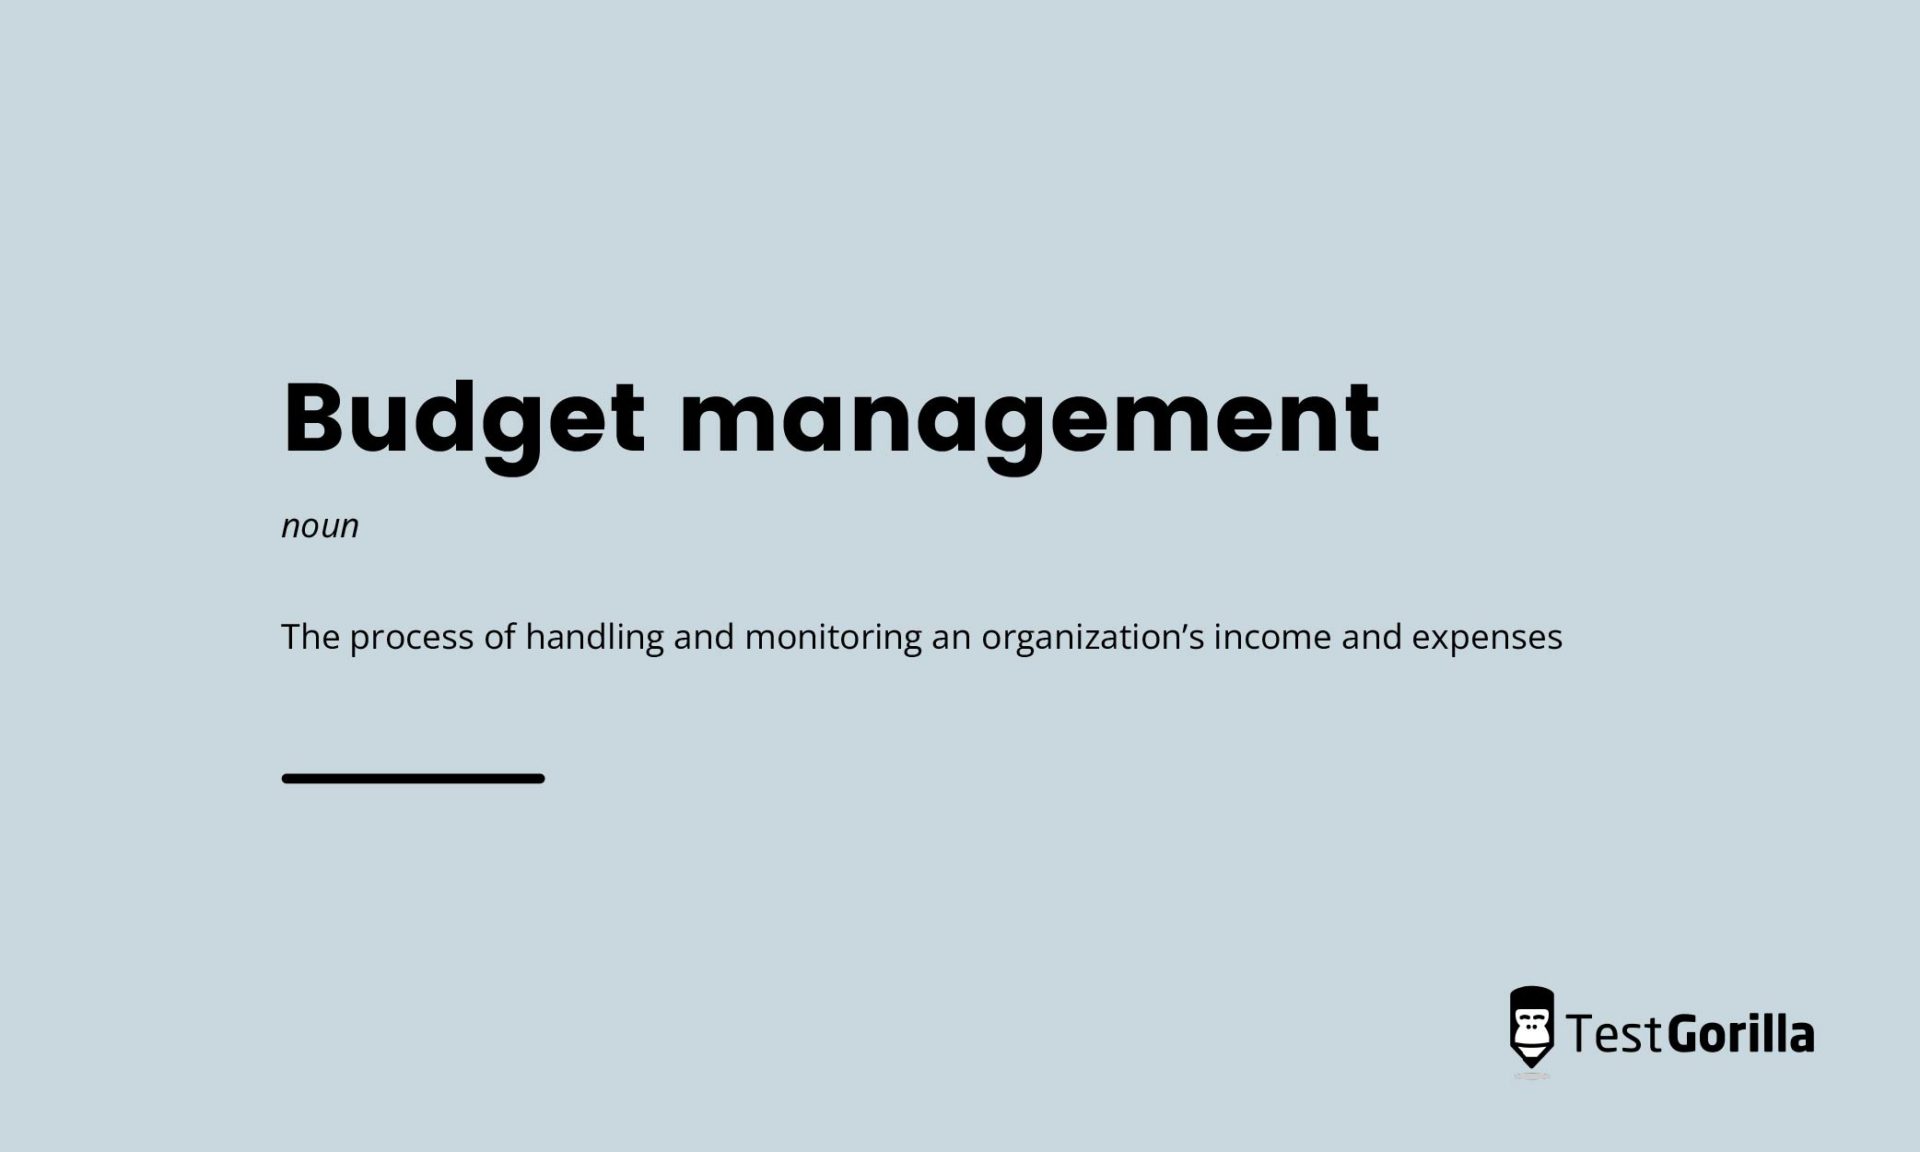 Budget management is the process of handling and monitoring an organization’s income and expenses. 